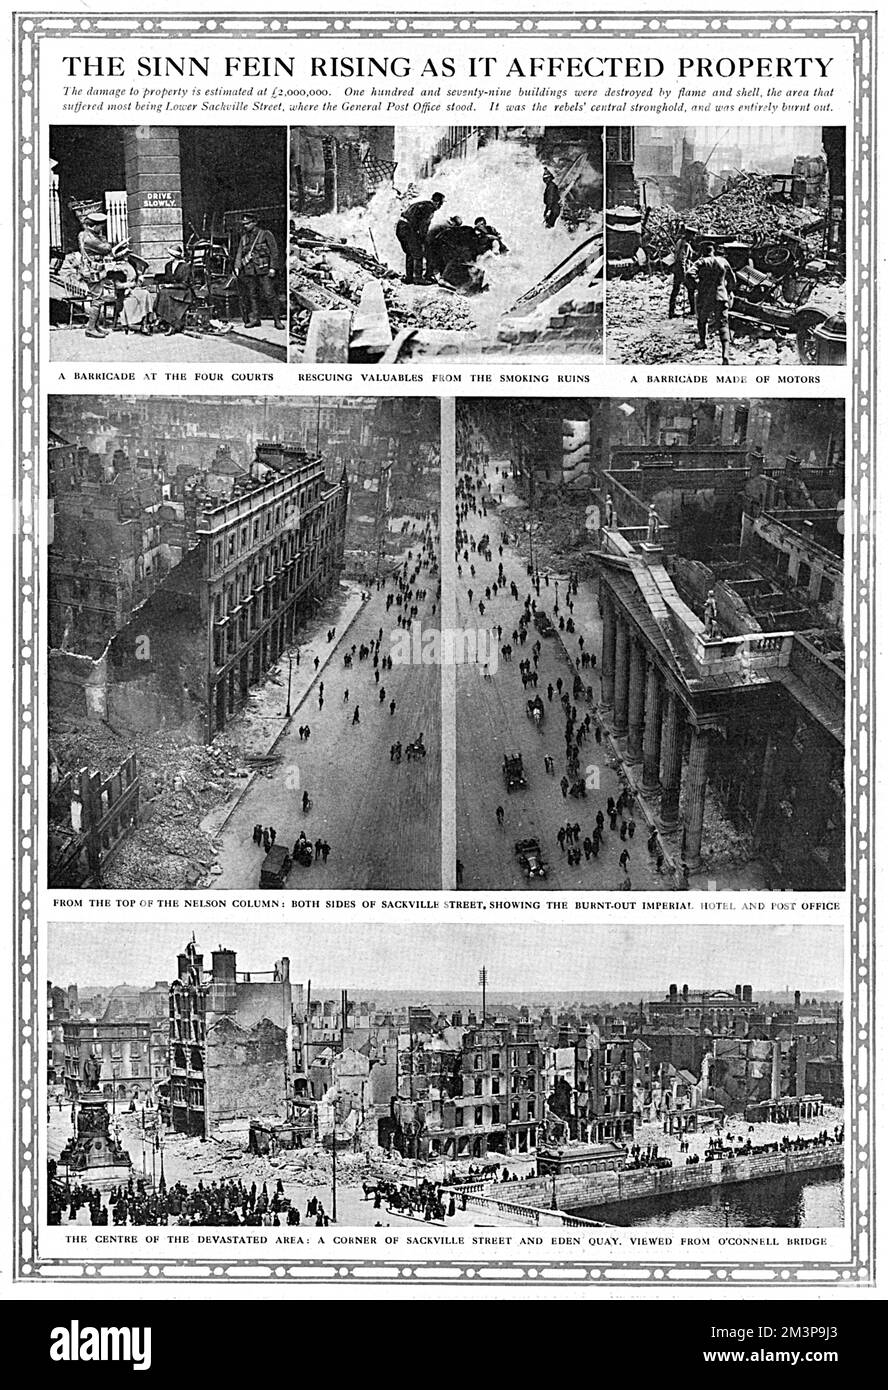 The devastating affects of the Easter Rebellion in Ireland in 1916. The main picture shows the burnt-out imperial hotel and post-office on Sackville Street in Dublin. According to The Graphic, the damage to property was estimated at £2,000,000 and 179 building were destroyed by flame and shell. The area that suffered the most was Lower Sackville Street which was the rebels' central stronghold and was entirely burnt out.     Date: 1916 Stock Photo